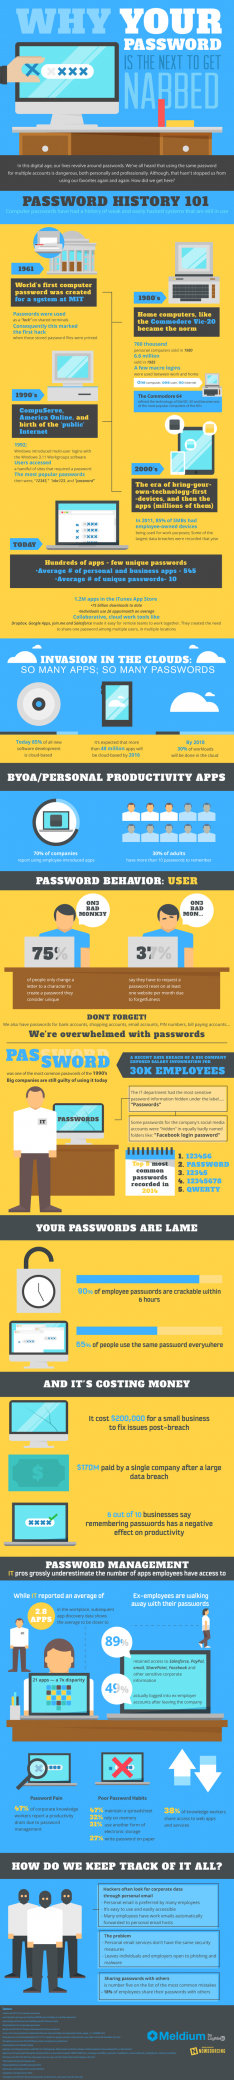 Your Password is also the following To Be Stolen [Infographic]